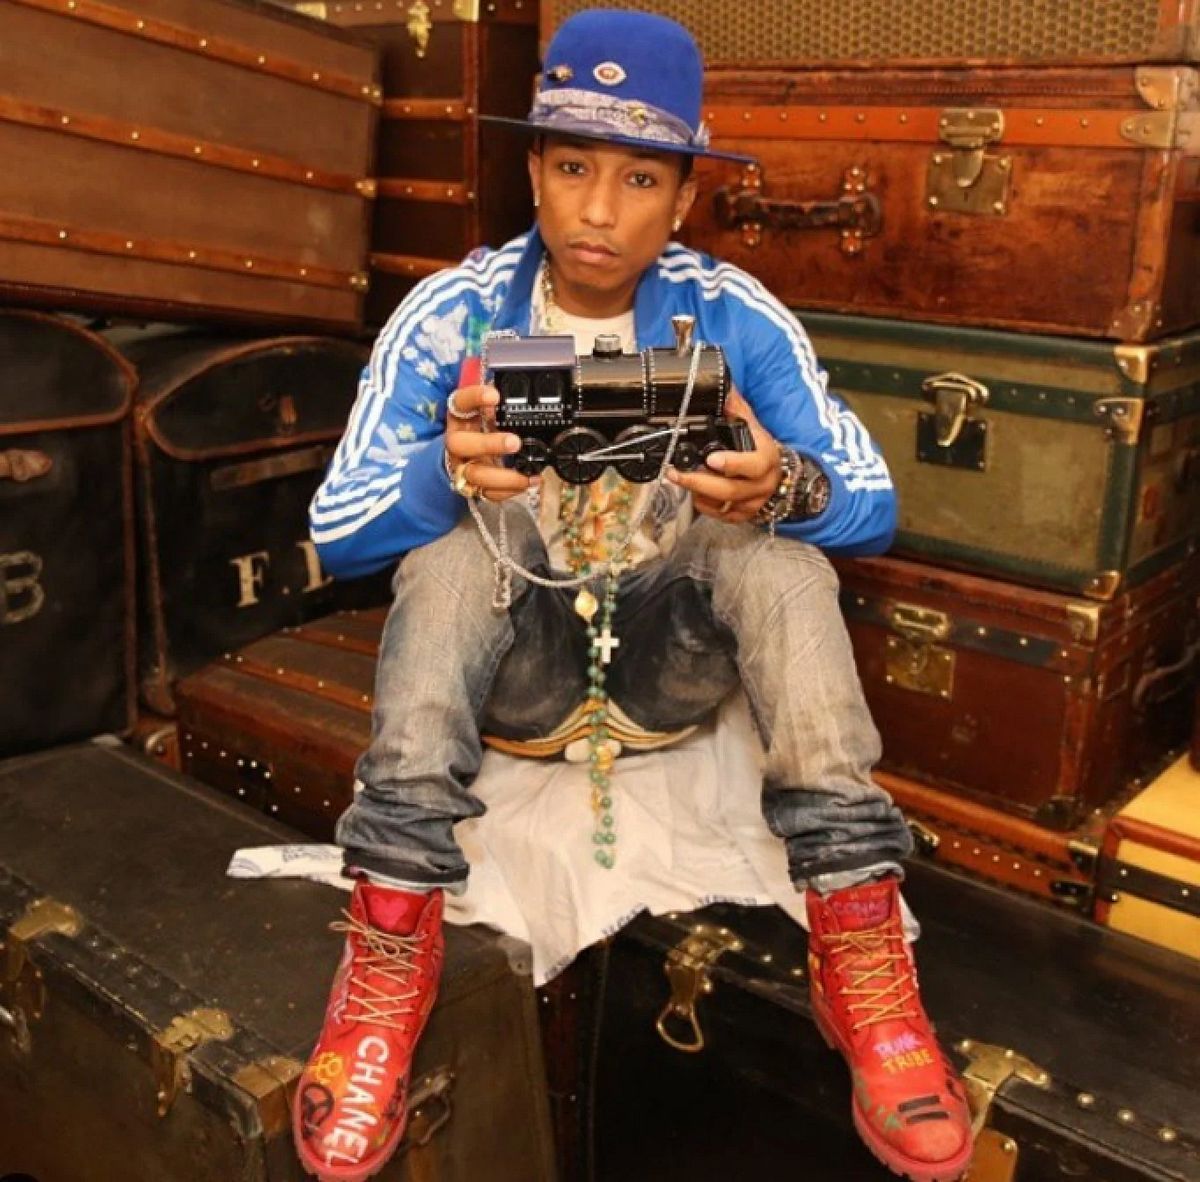 8 of Pharrell Williams' best luxury collaborations to date: before